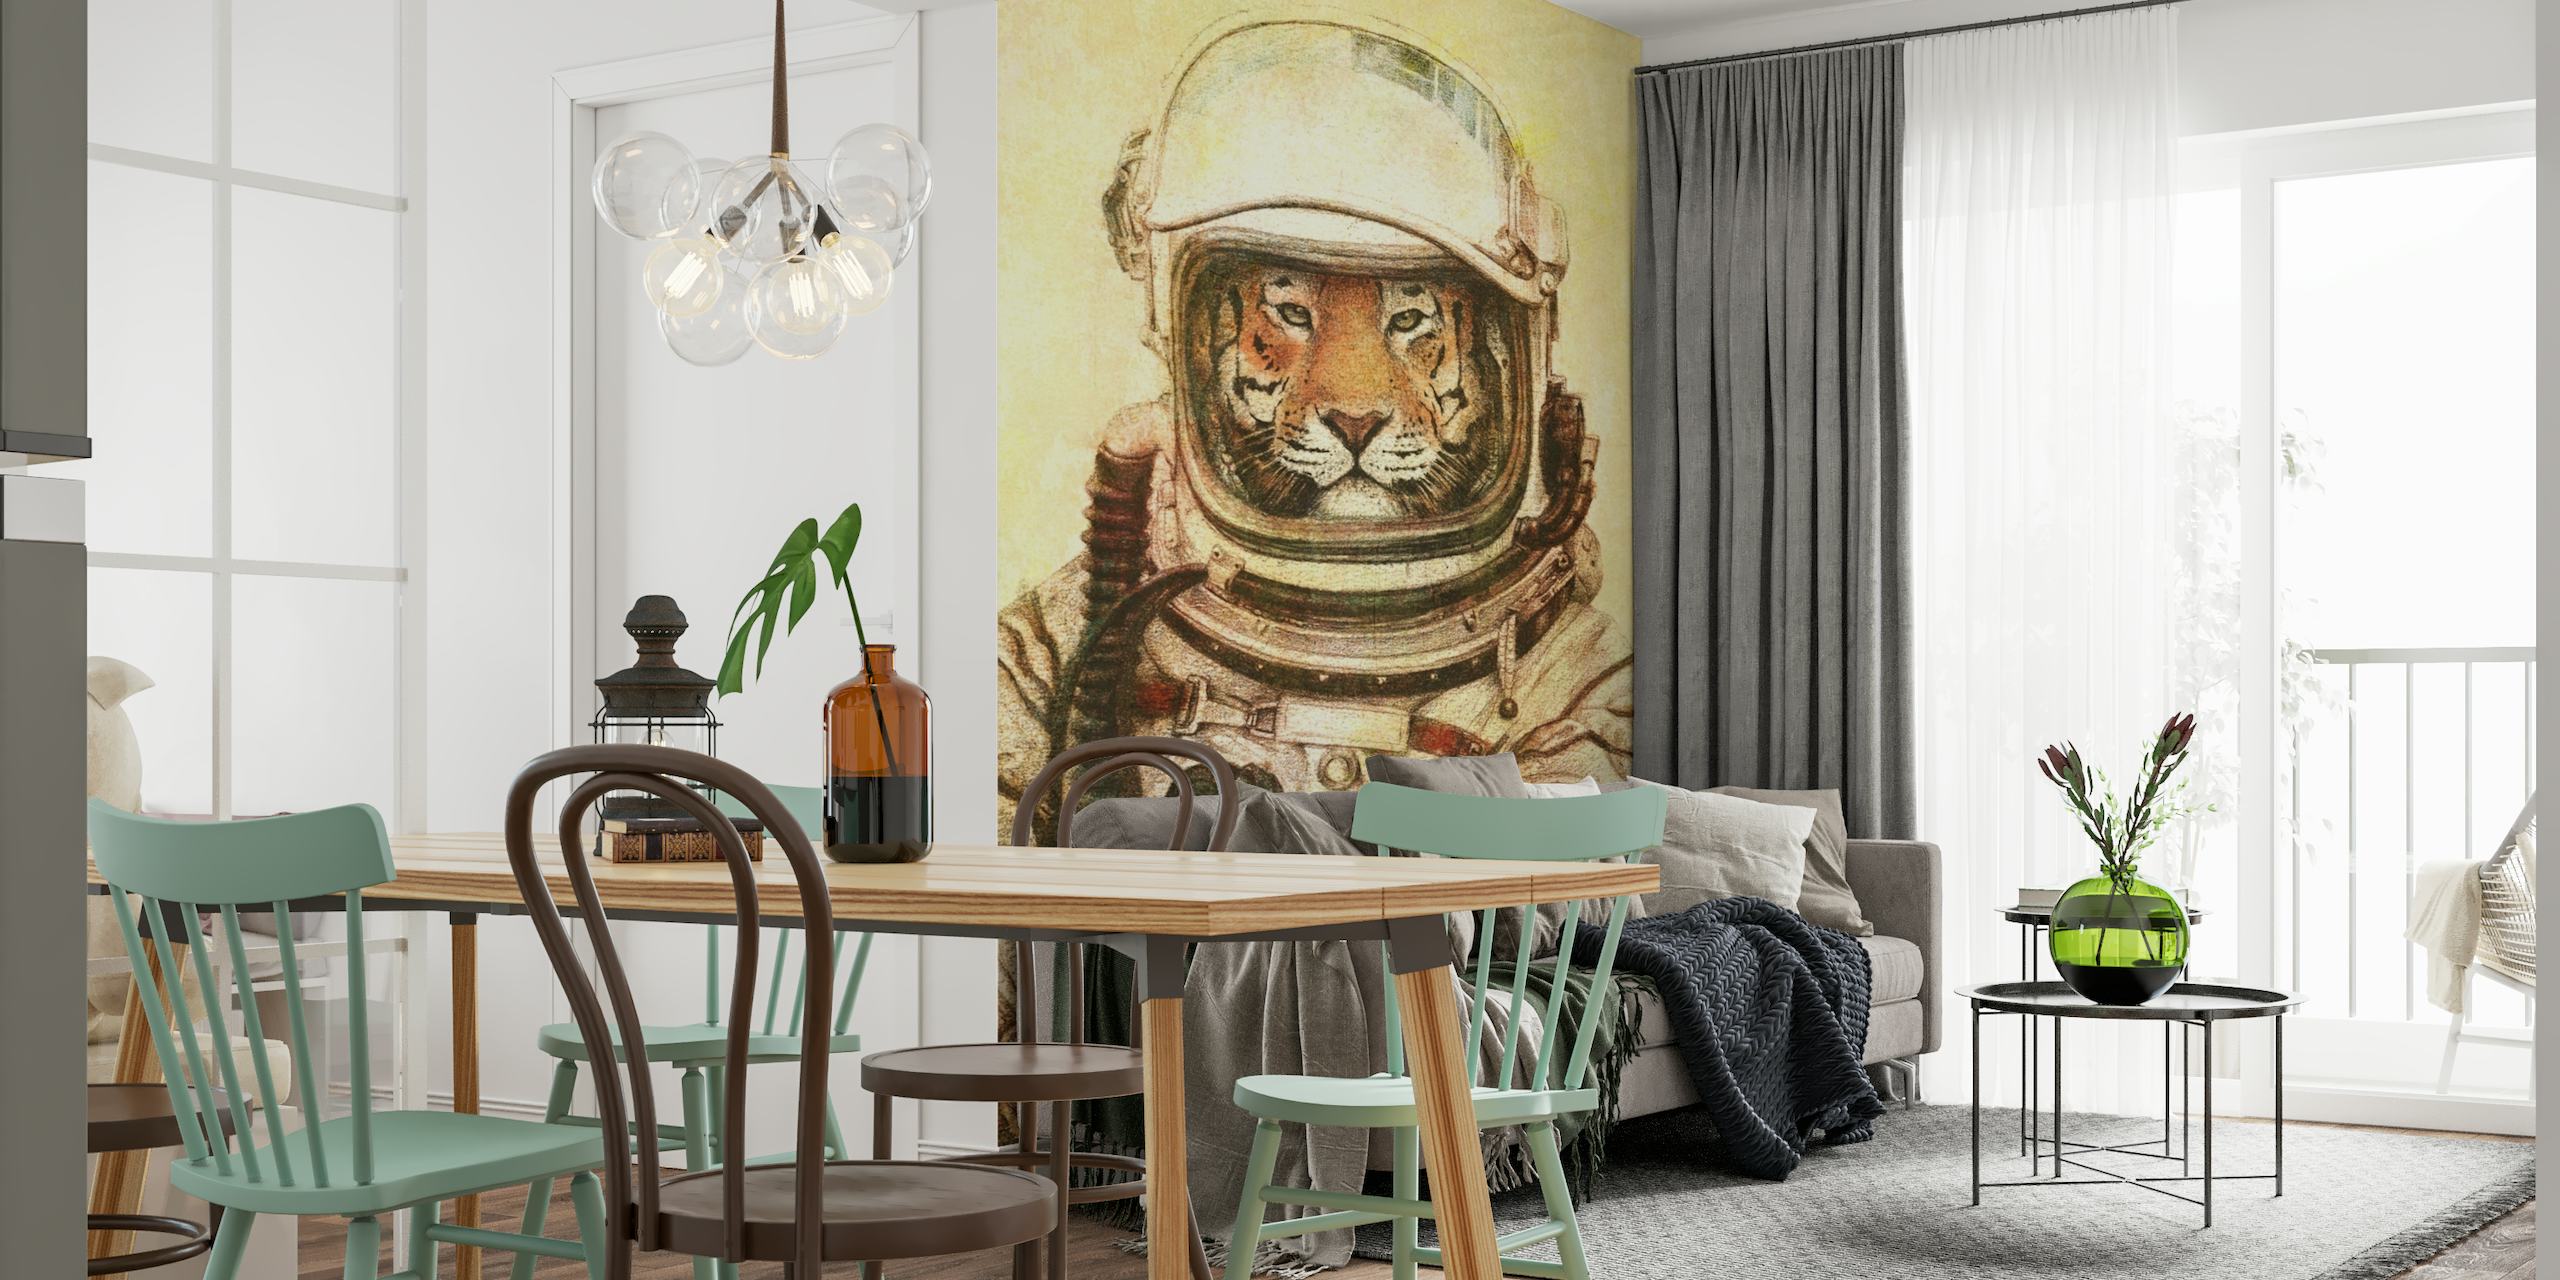 Tiger astronaut wall mural depicting space exploration with a wild twist